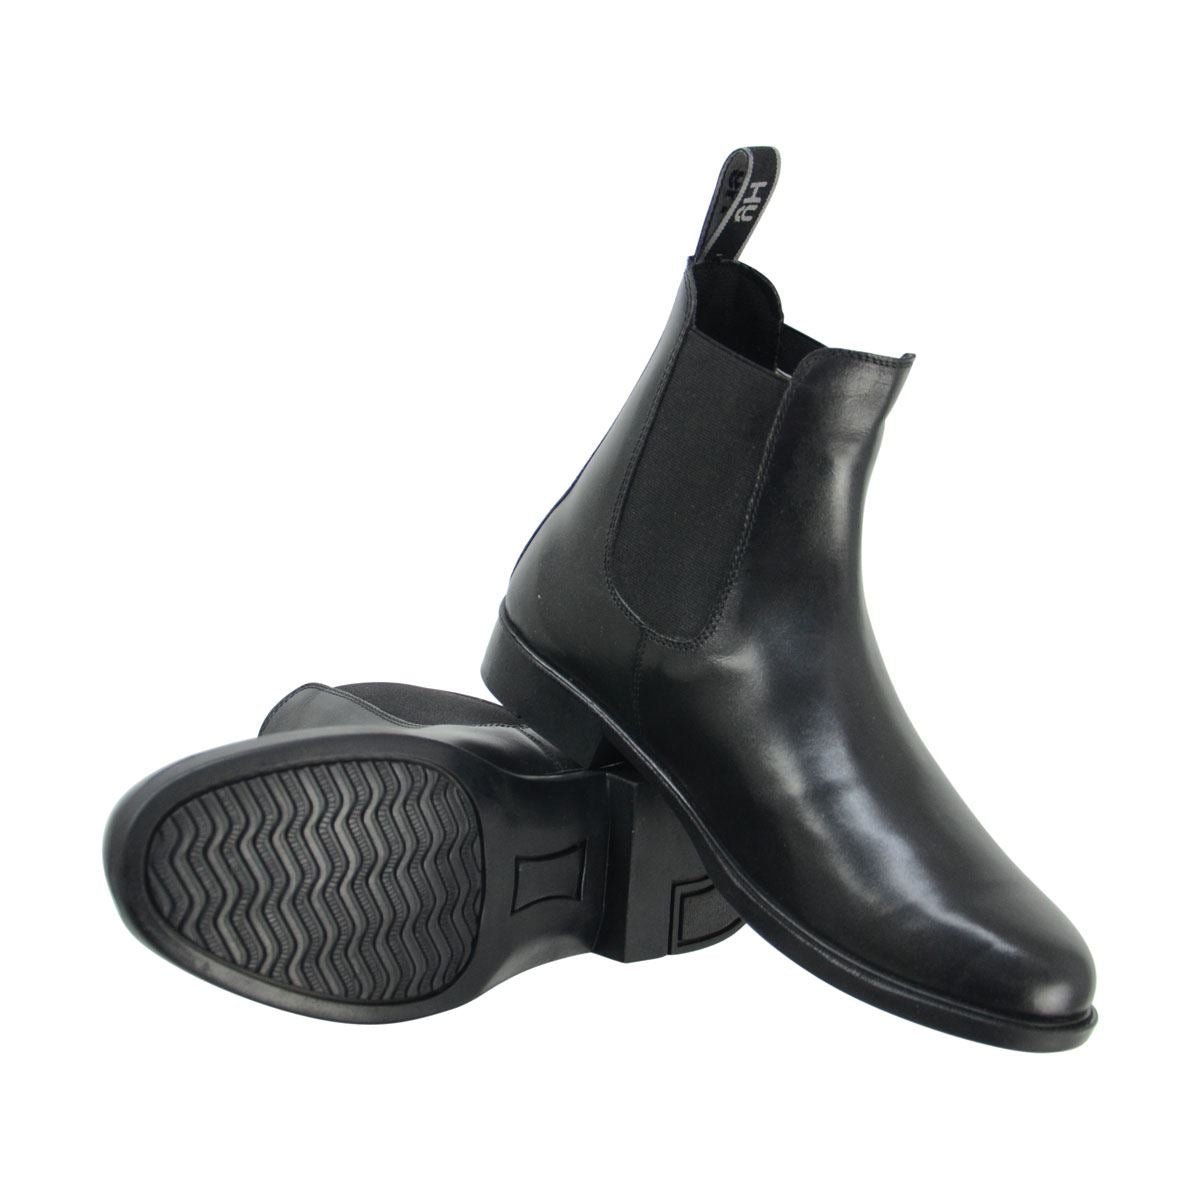 HyLAND Melford Leather Jodhpur Boot - Just Horse Riders